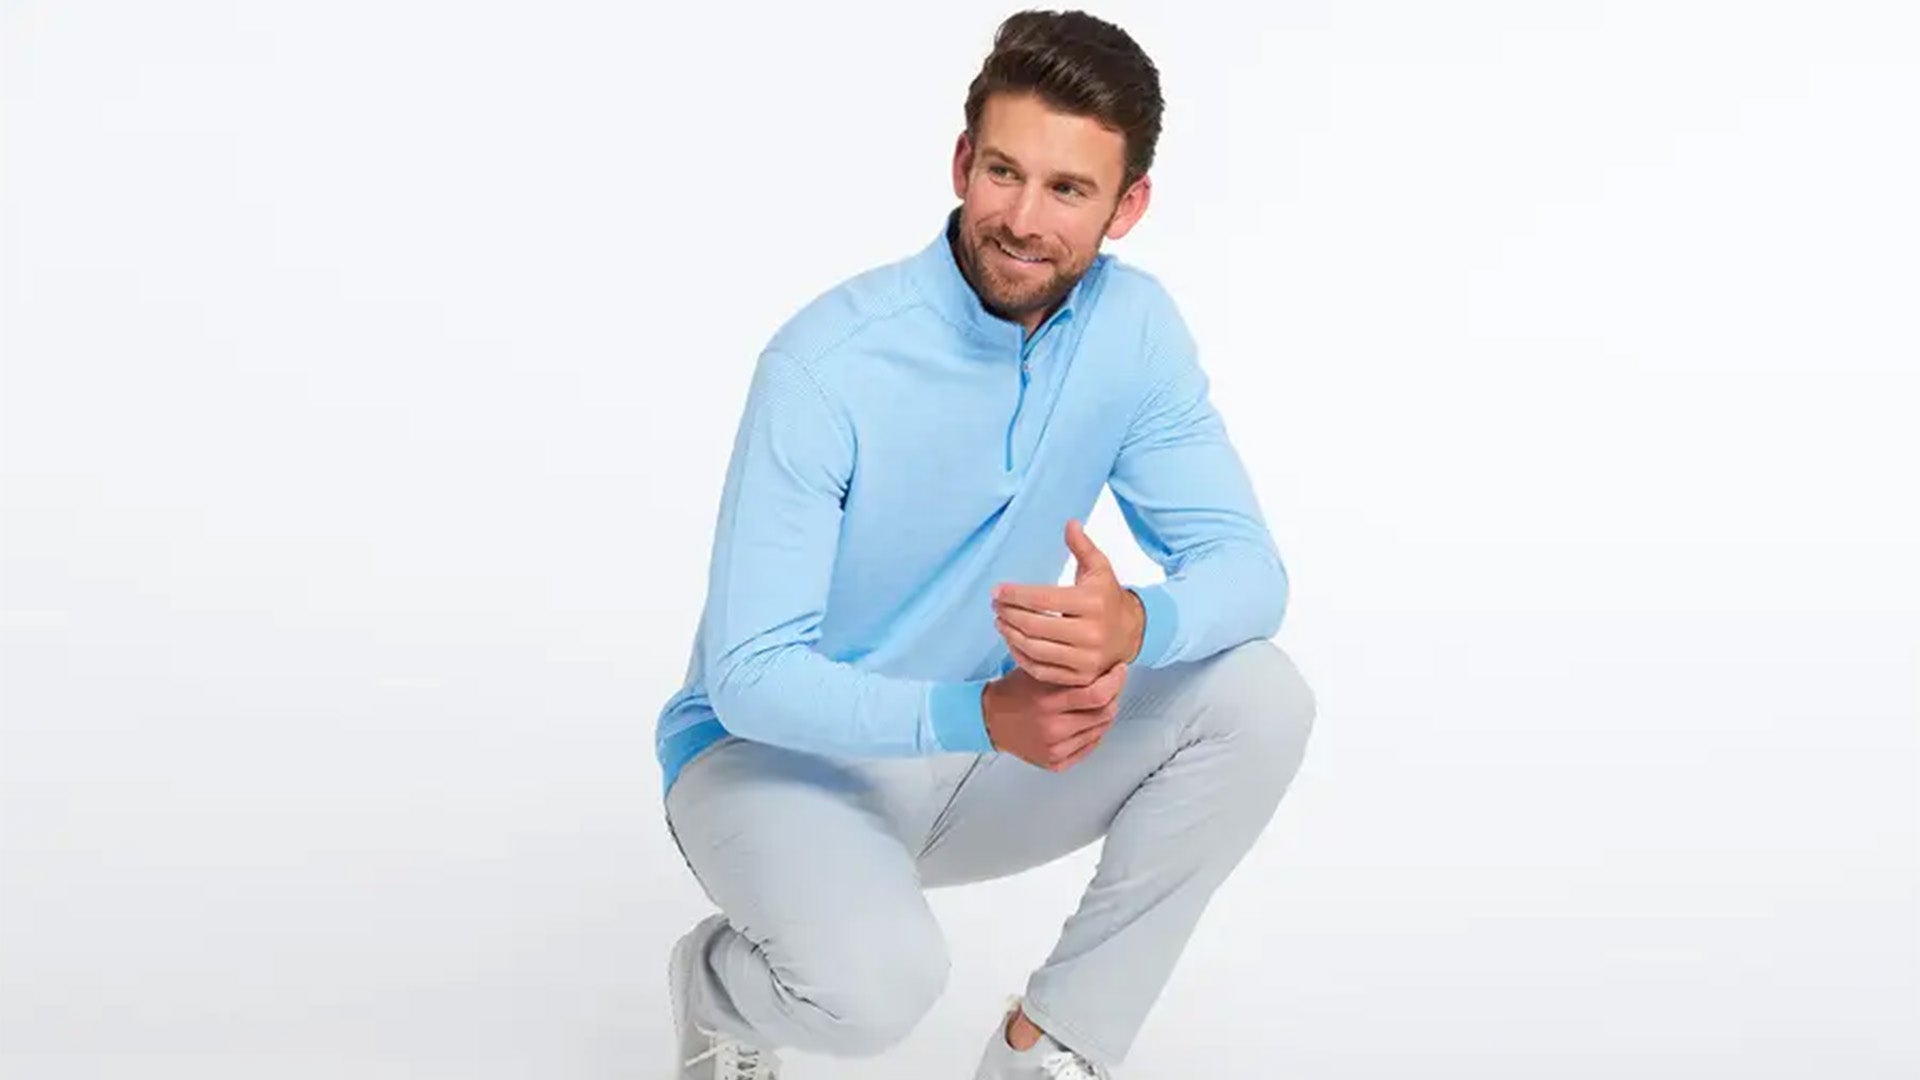 Trendy and Organic Dri Fit Golf Shirts Wholesale for All Seasons